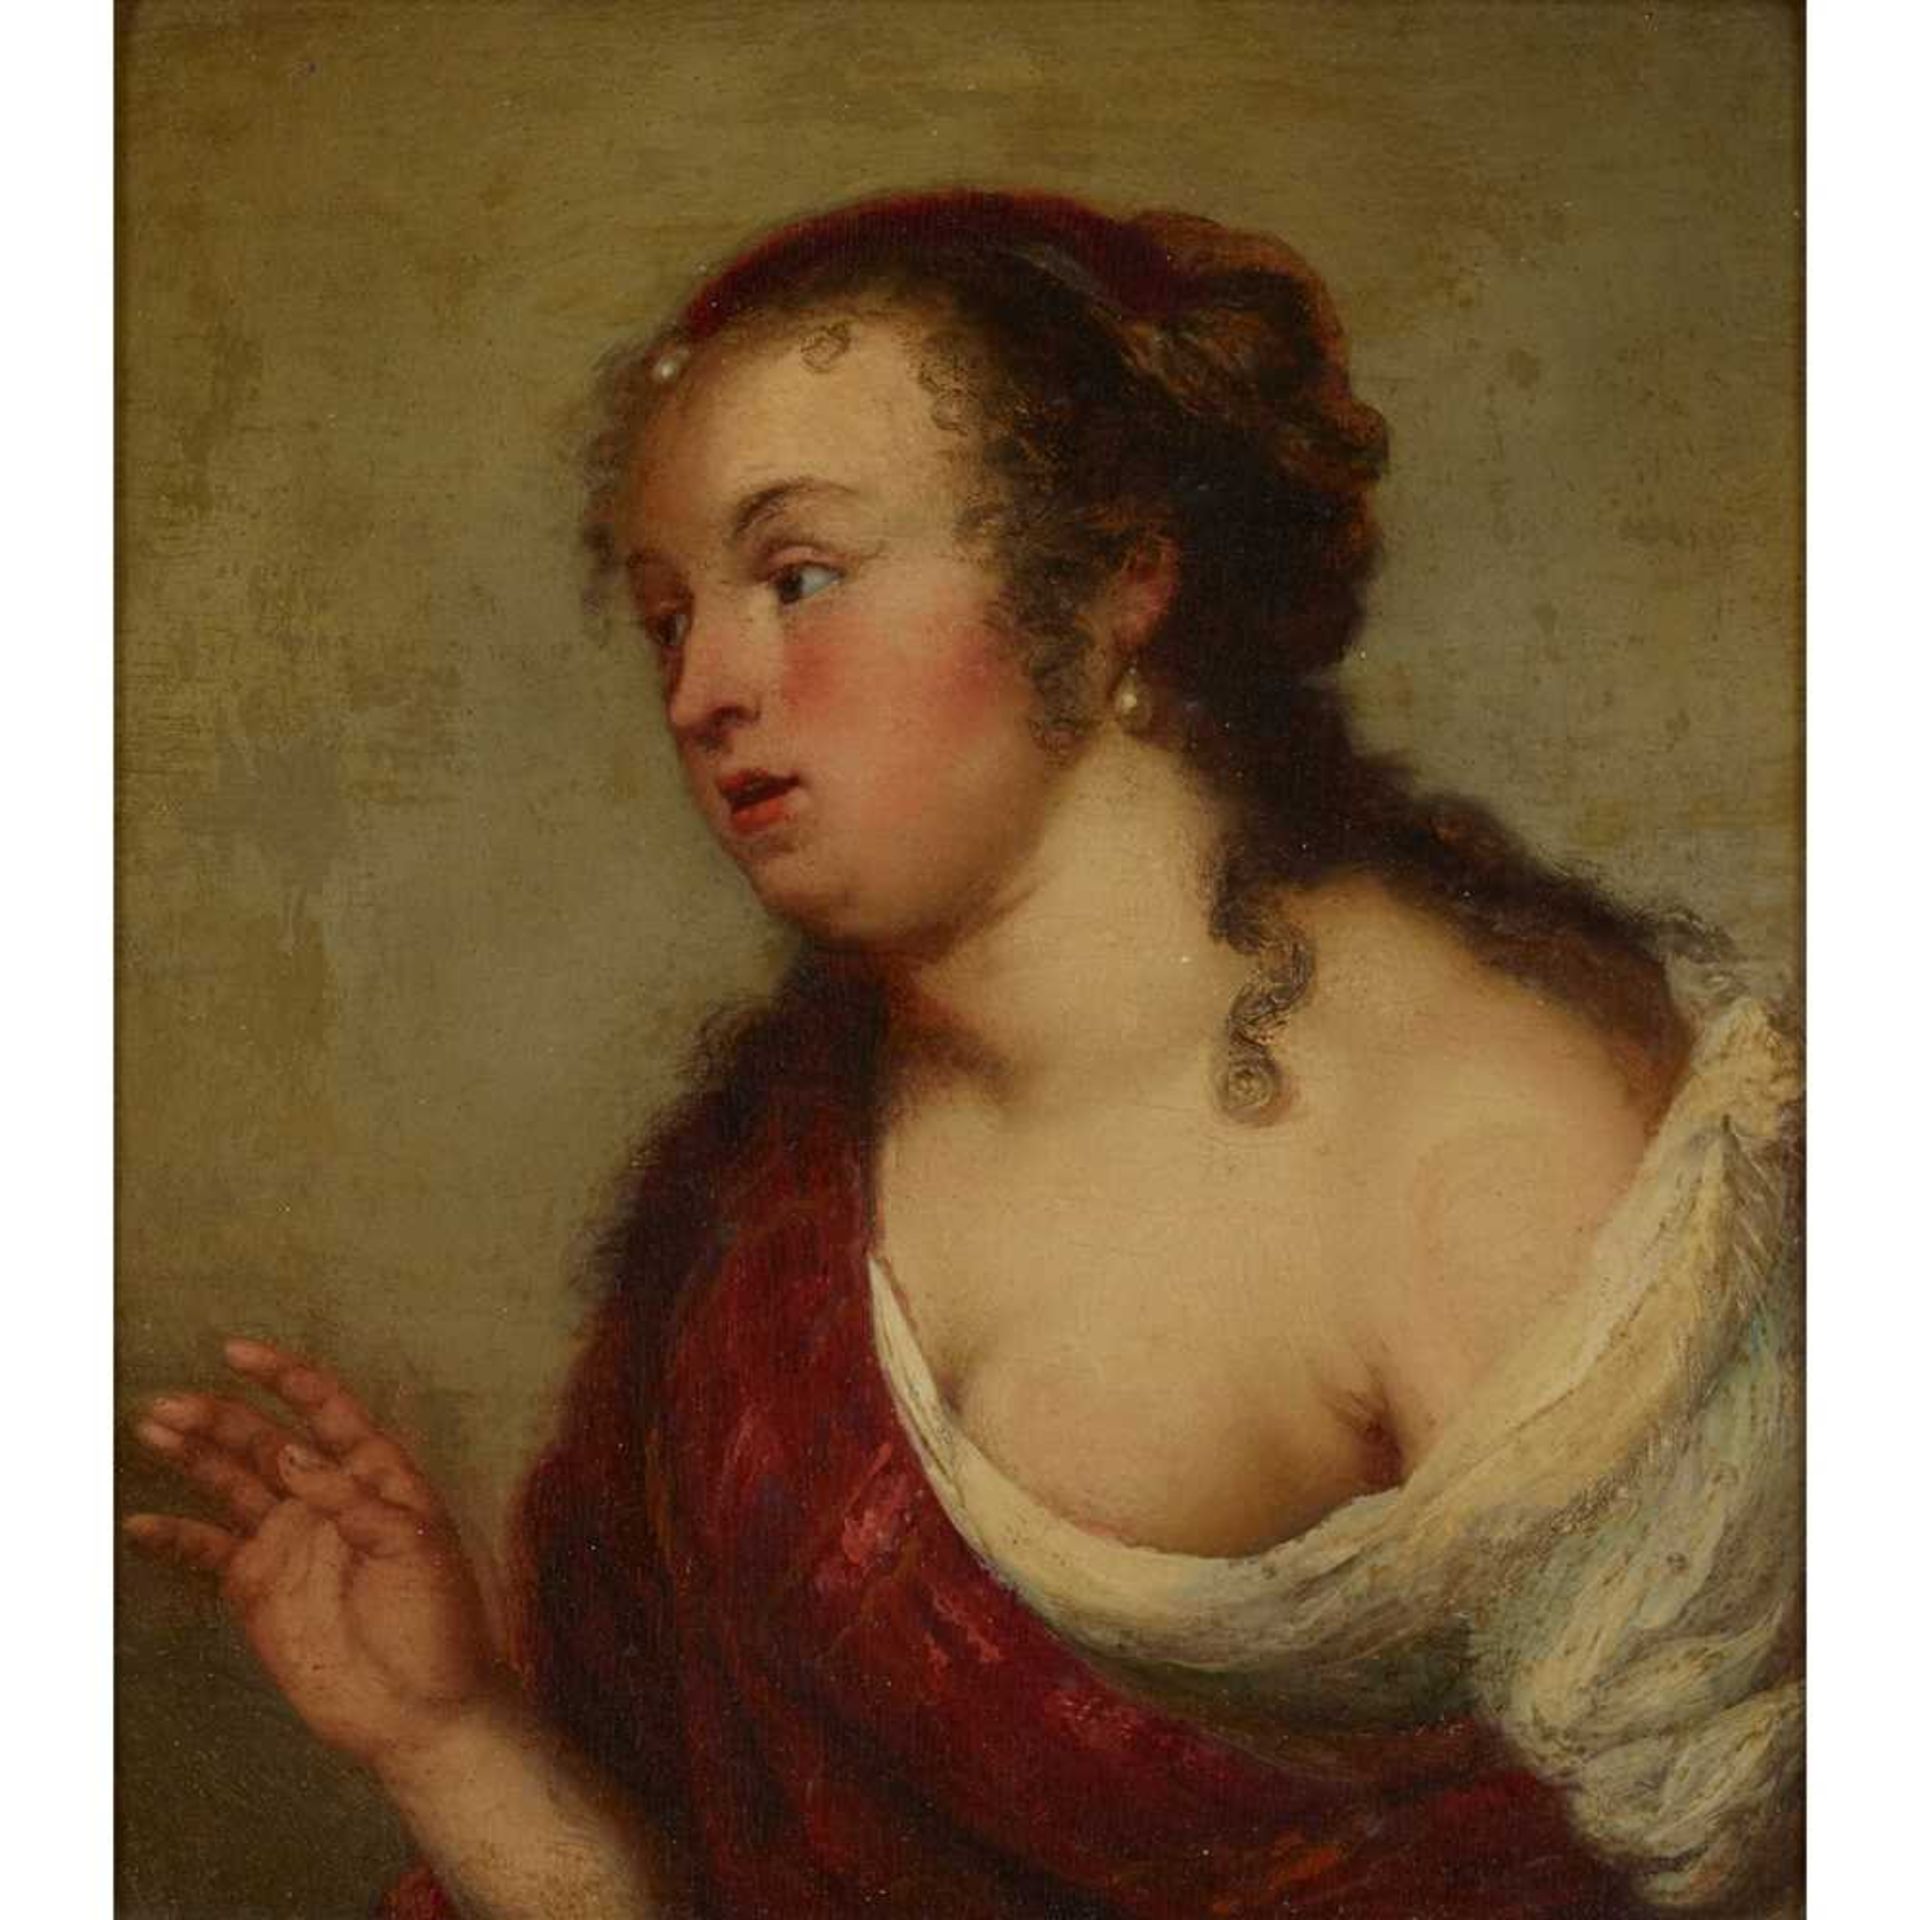 18TH CENTURY SCHOOL HALF-LENGTH PORTRAIT OF A WOMAN WITH A PATTERNED ROBE